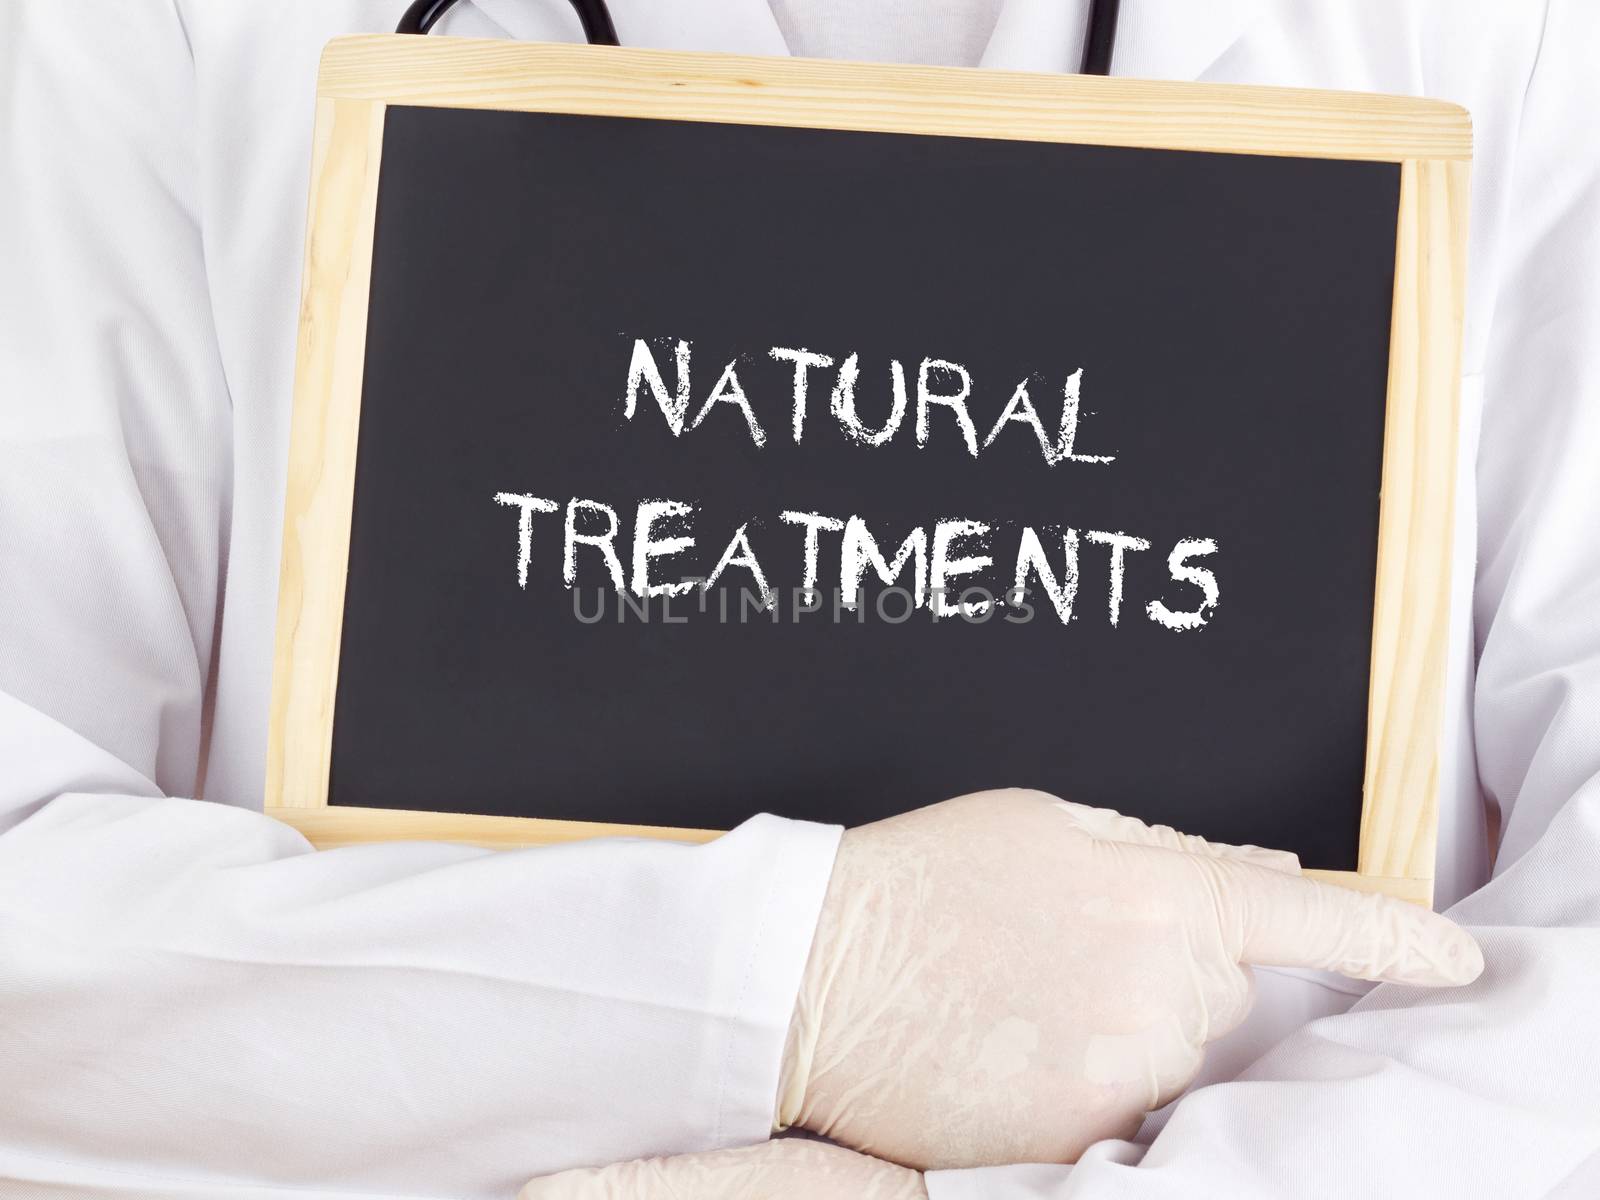 Doctor shows information: natural treatments by gwolters